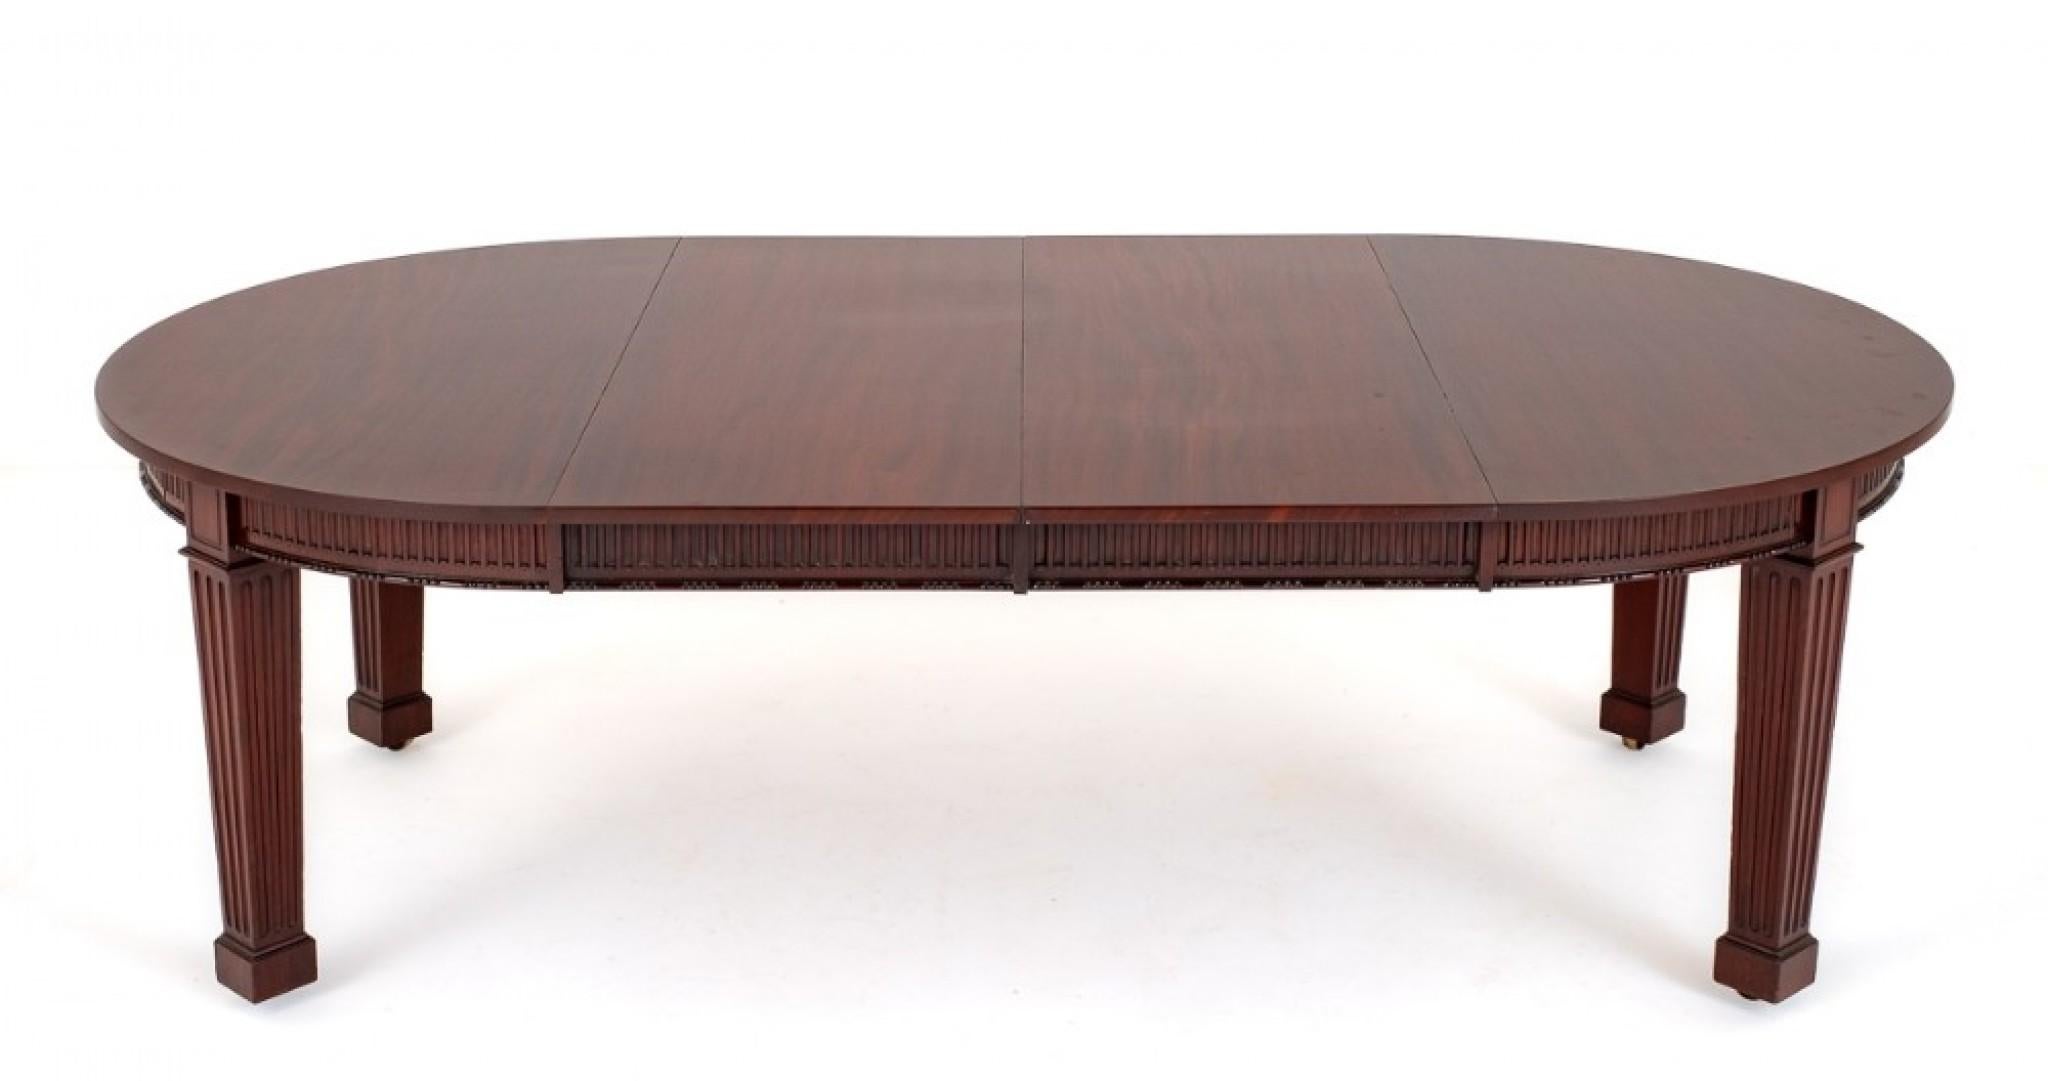 Period Victorian Dining Table Extending Mahogany 2 Leaf 2